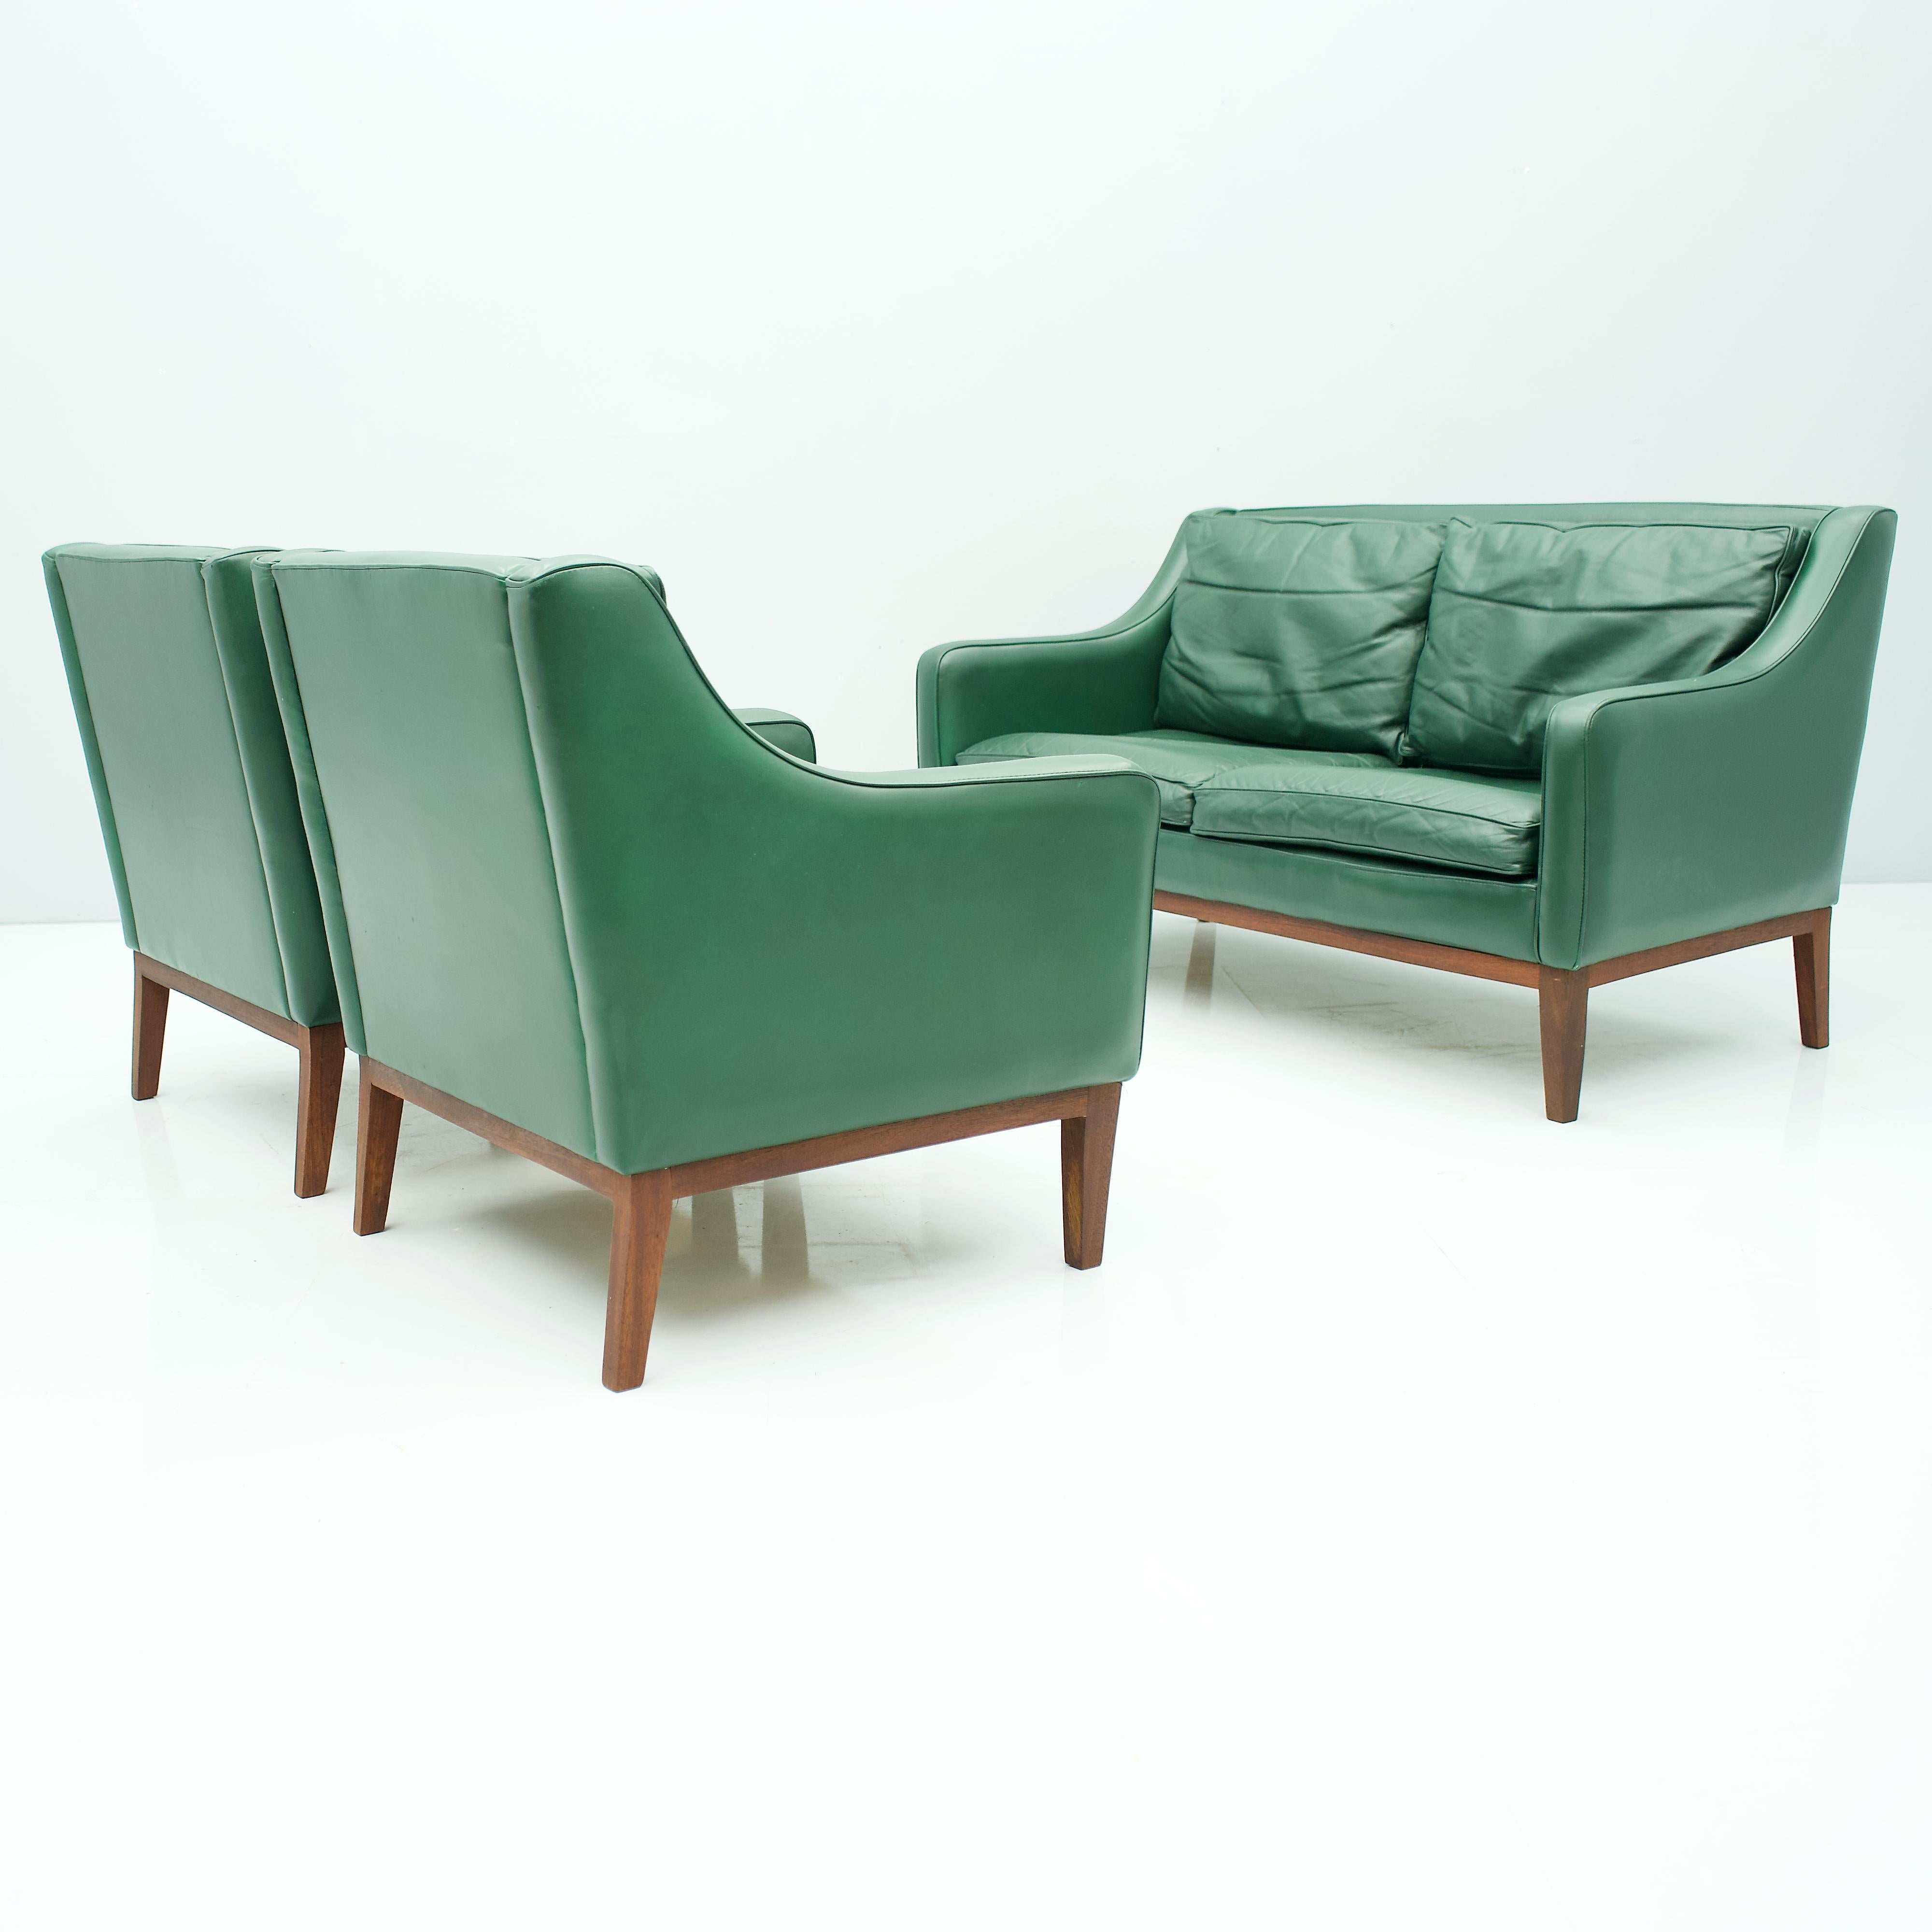 Mid-20th Century Living Room Set in Green Leather Sofa and Lounge Chairs Italy 1958 Teak For Sale